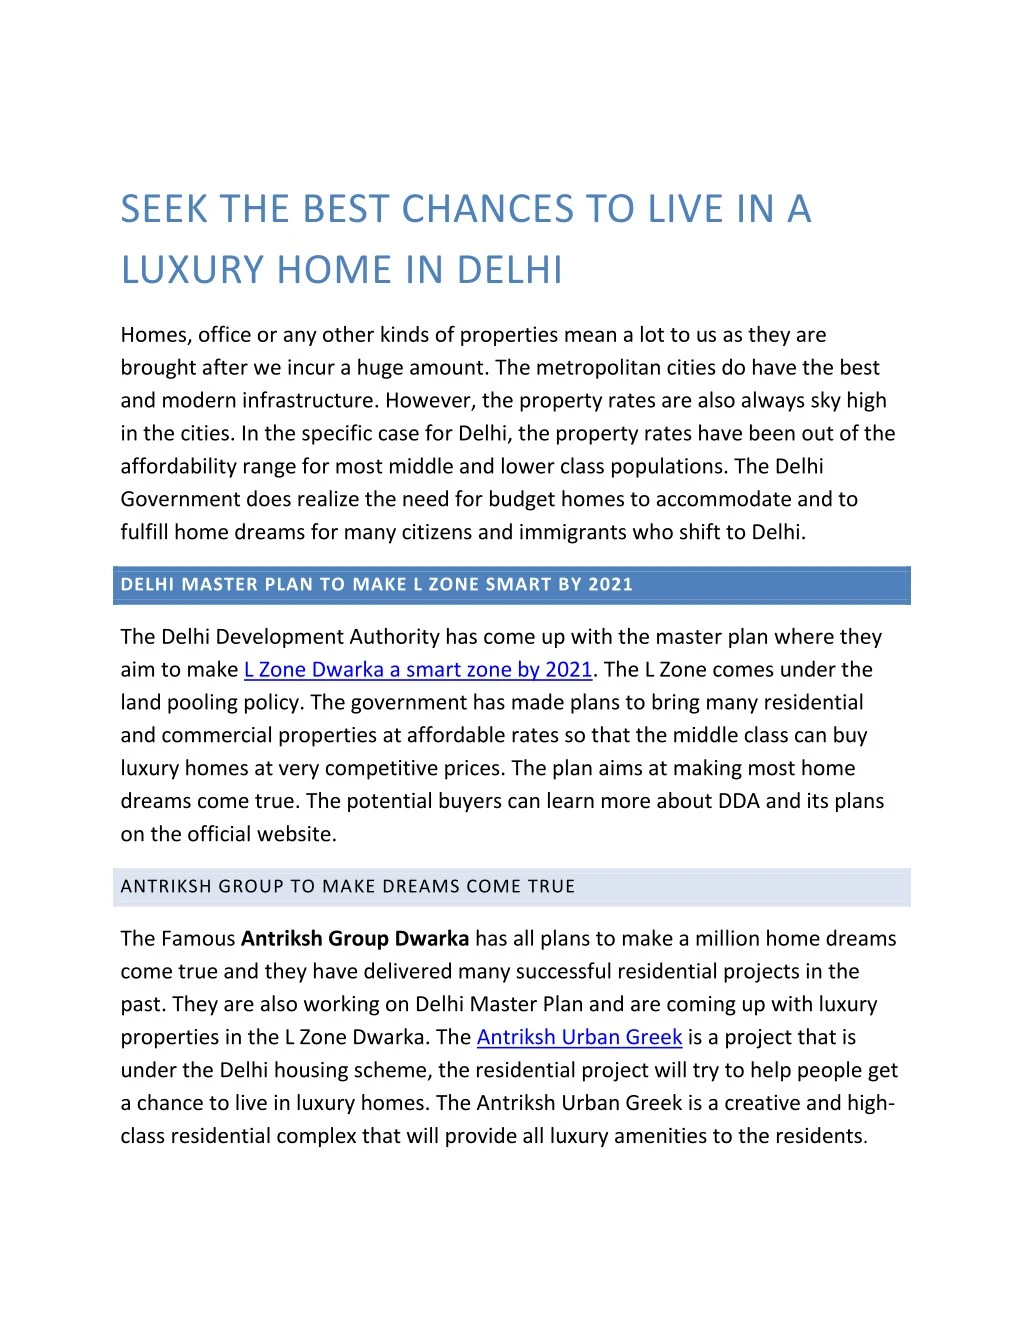 seek the best chances to live in a luxury home